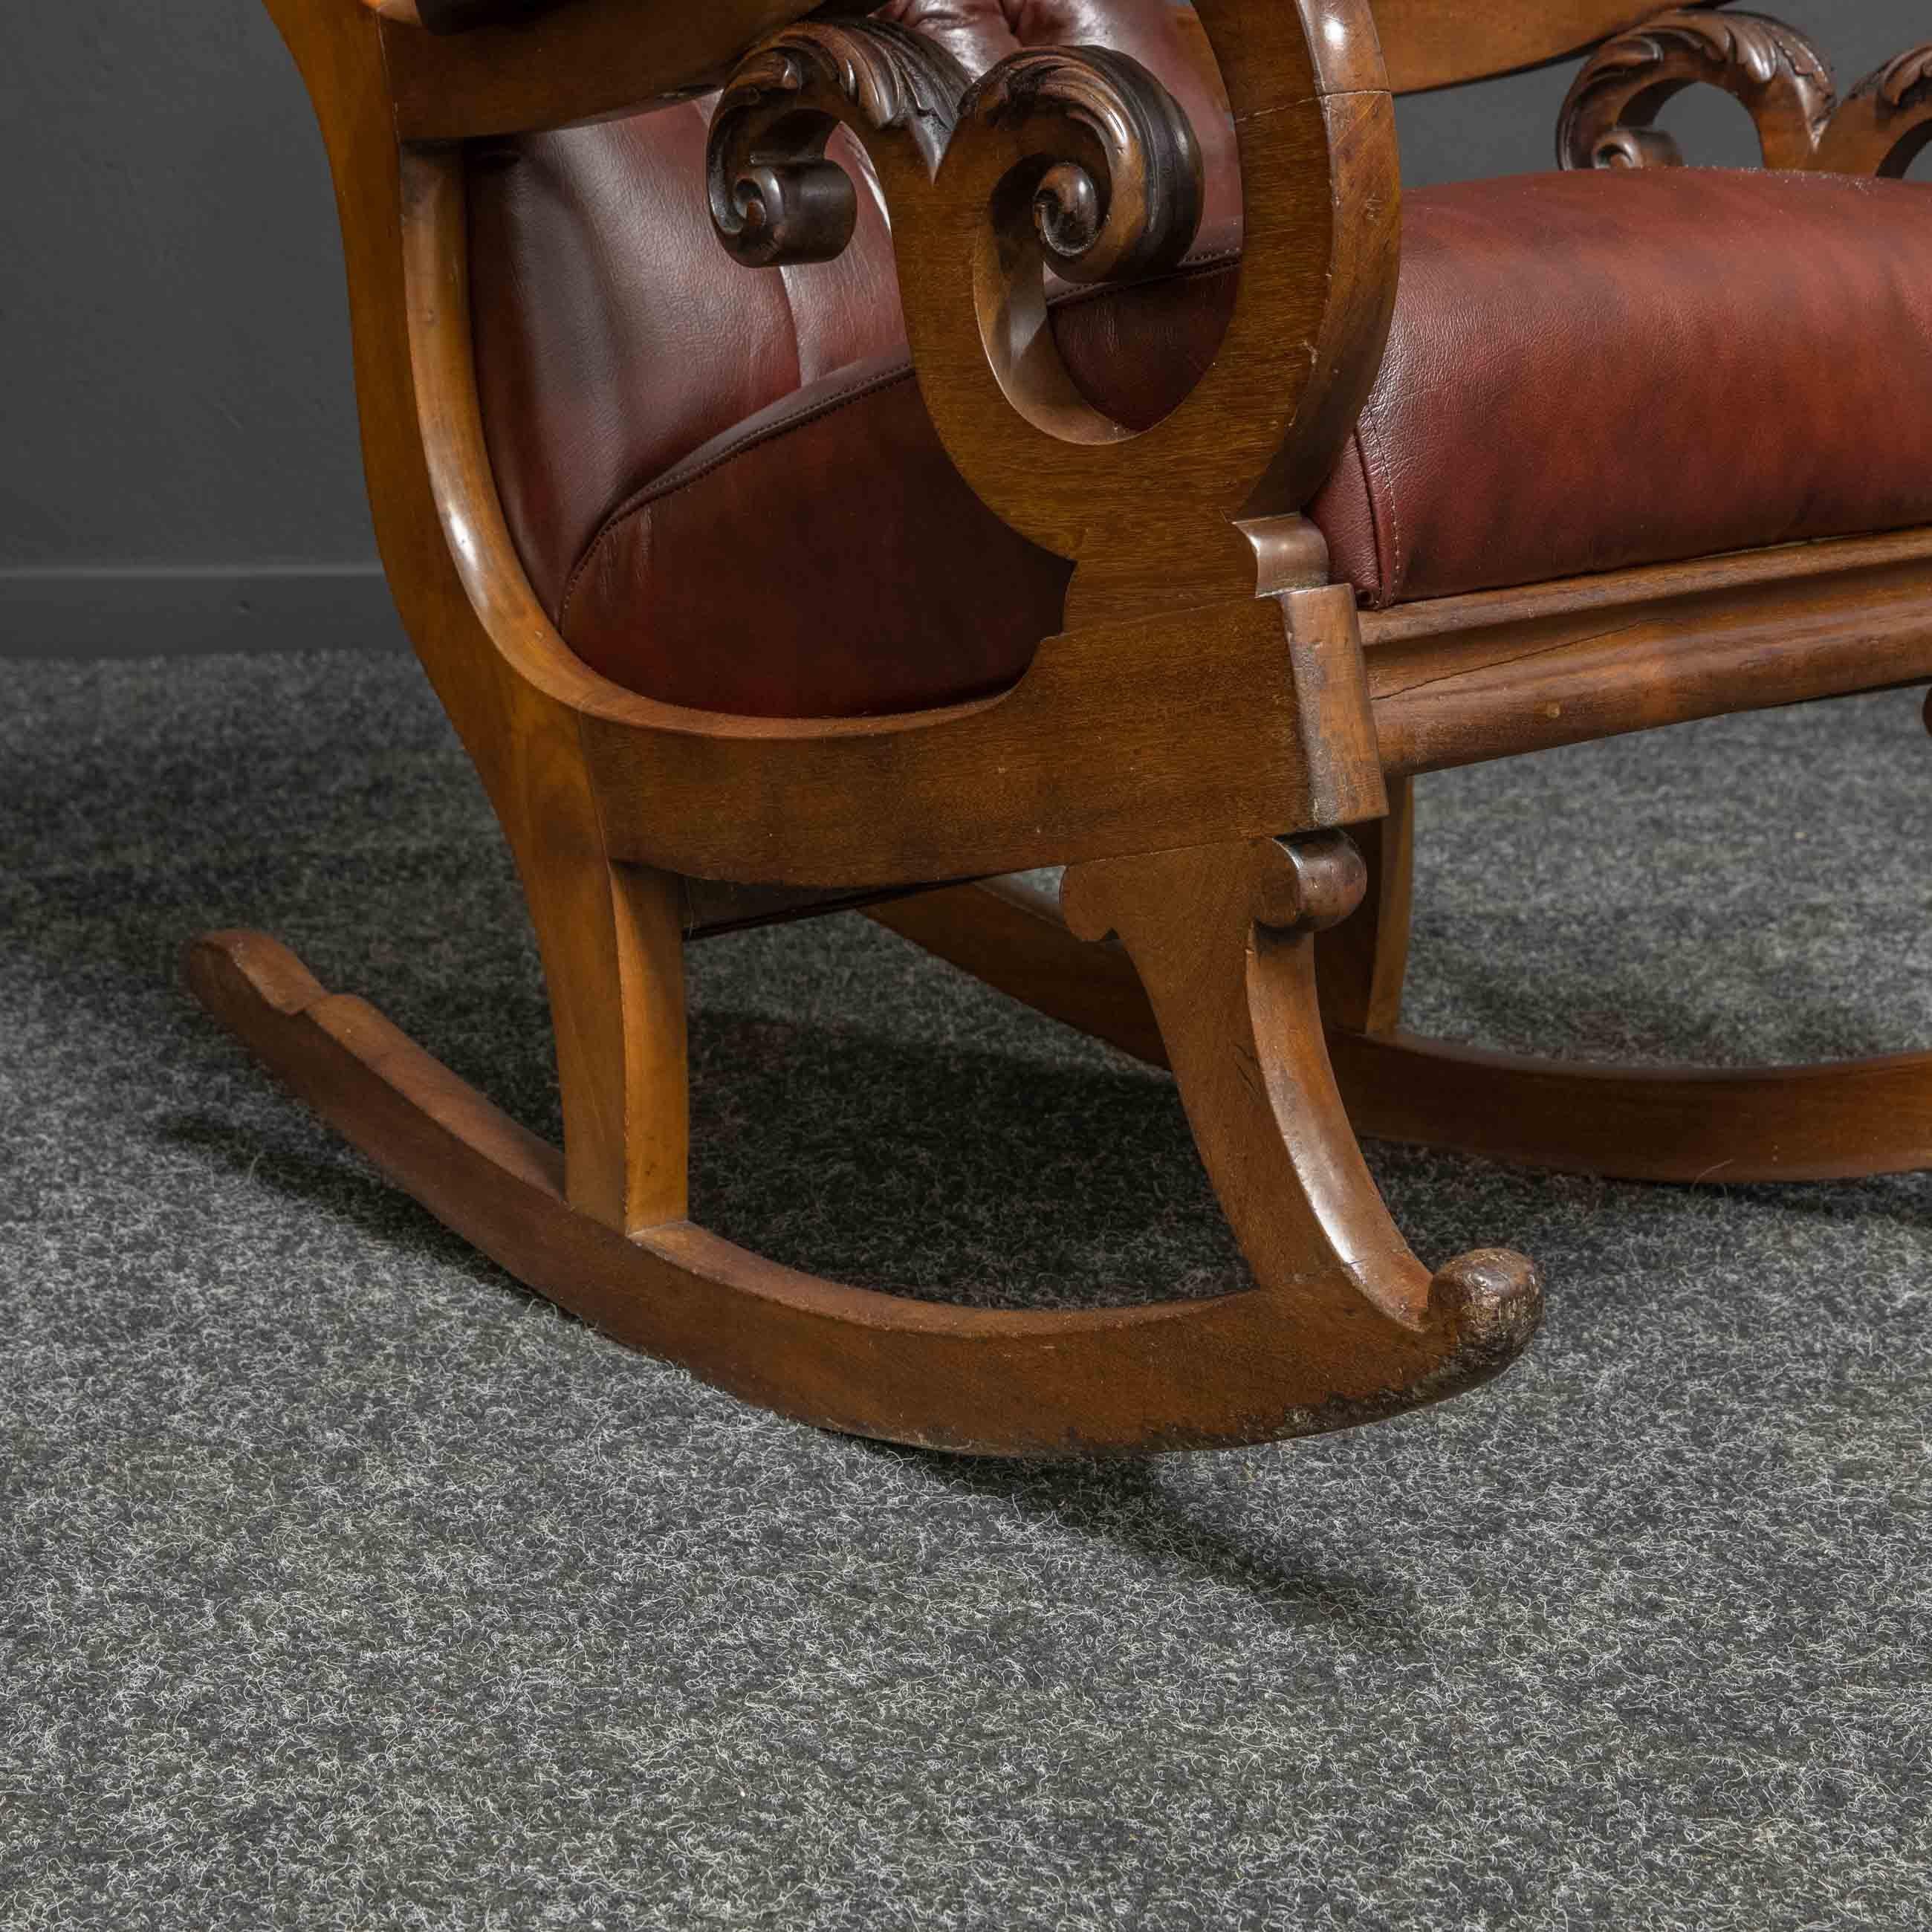 A superb Victorian mahogany rocking chair of much above average quality. The shapely frame has swept arms and underframe, with crisply carved scrolls to the underarms. Because it is special we decided to re-polish the frame and call upon our